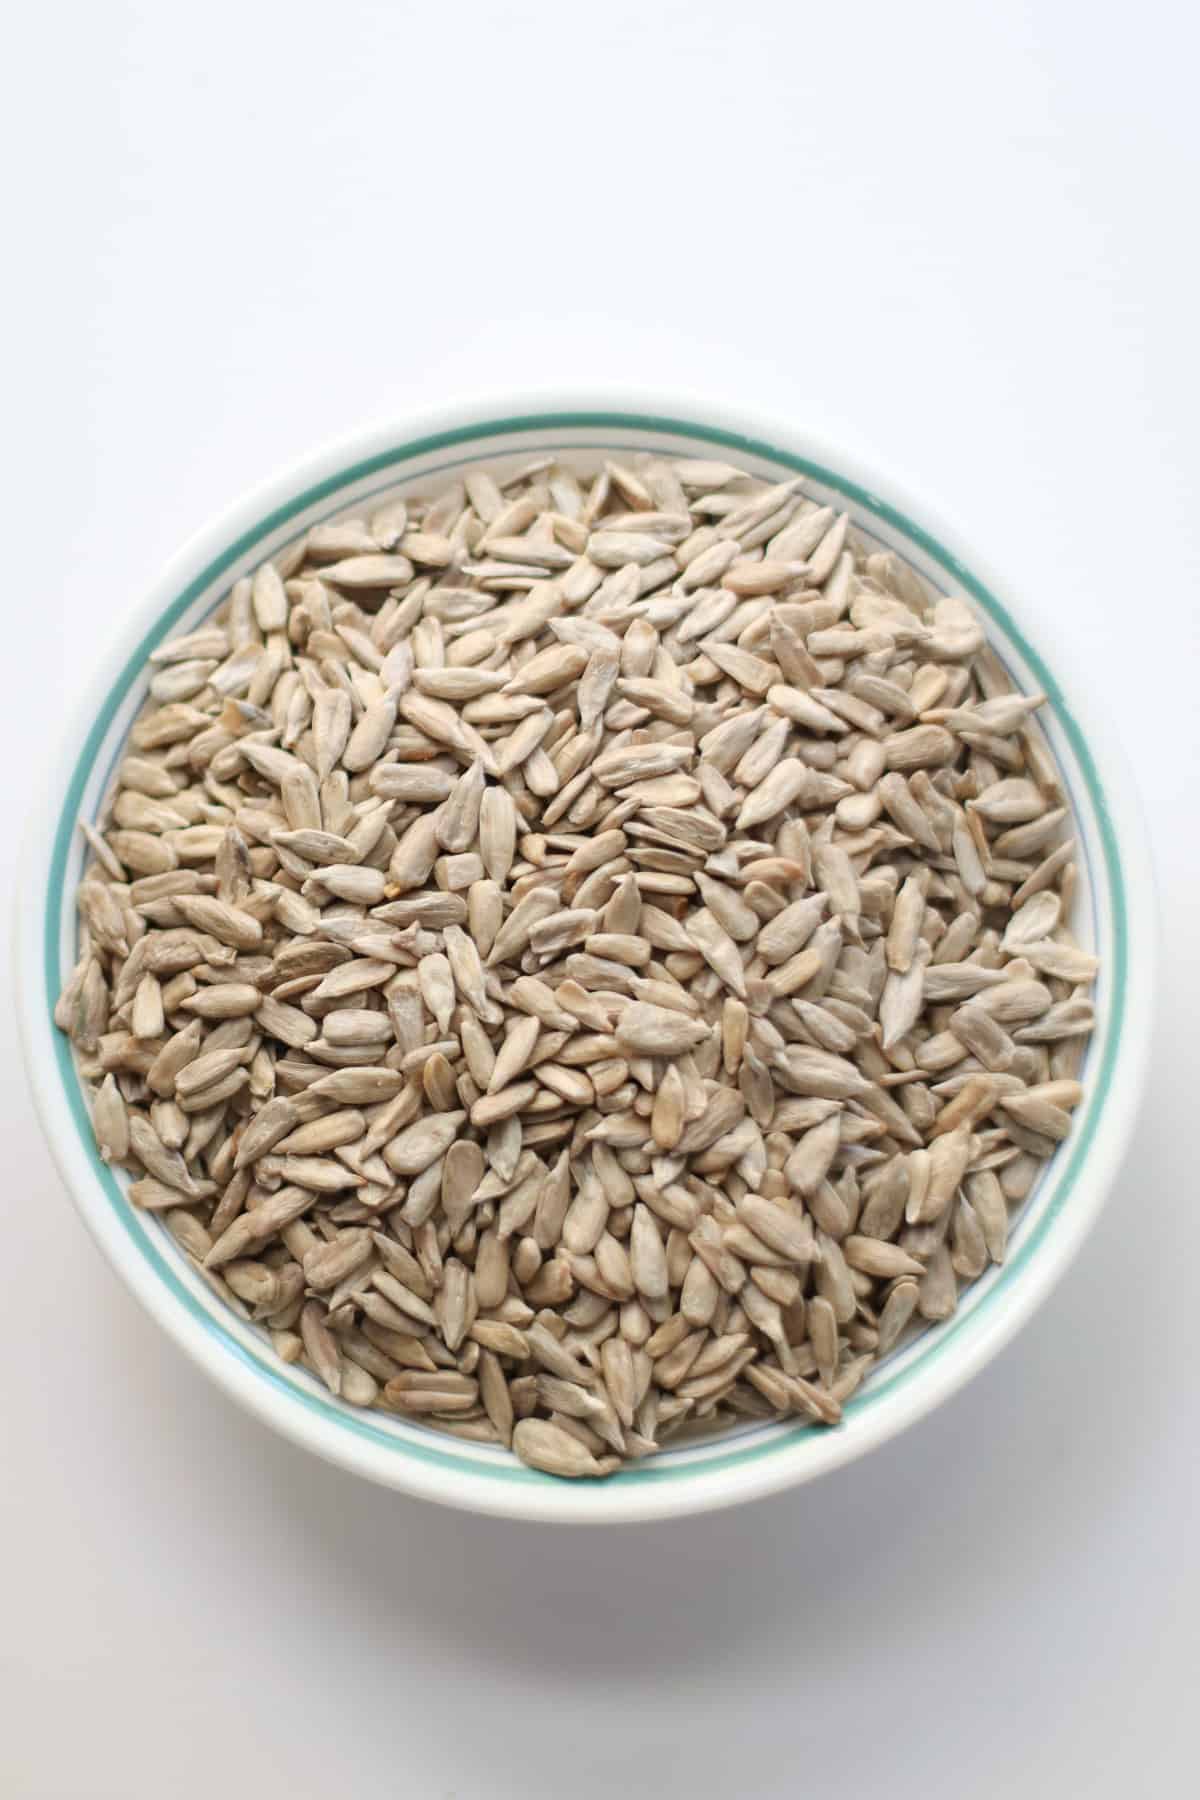 Sunflower seeds in a bowl.